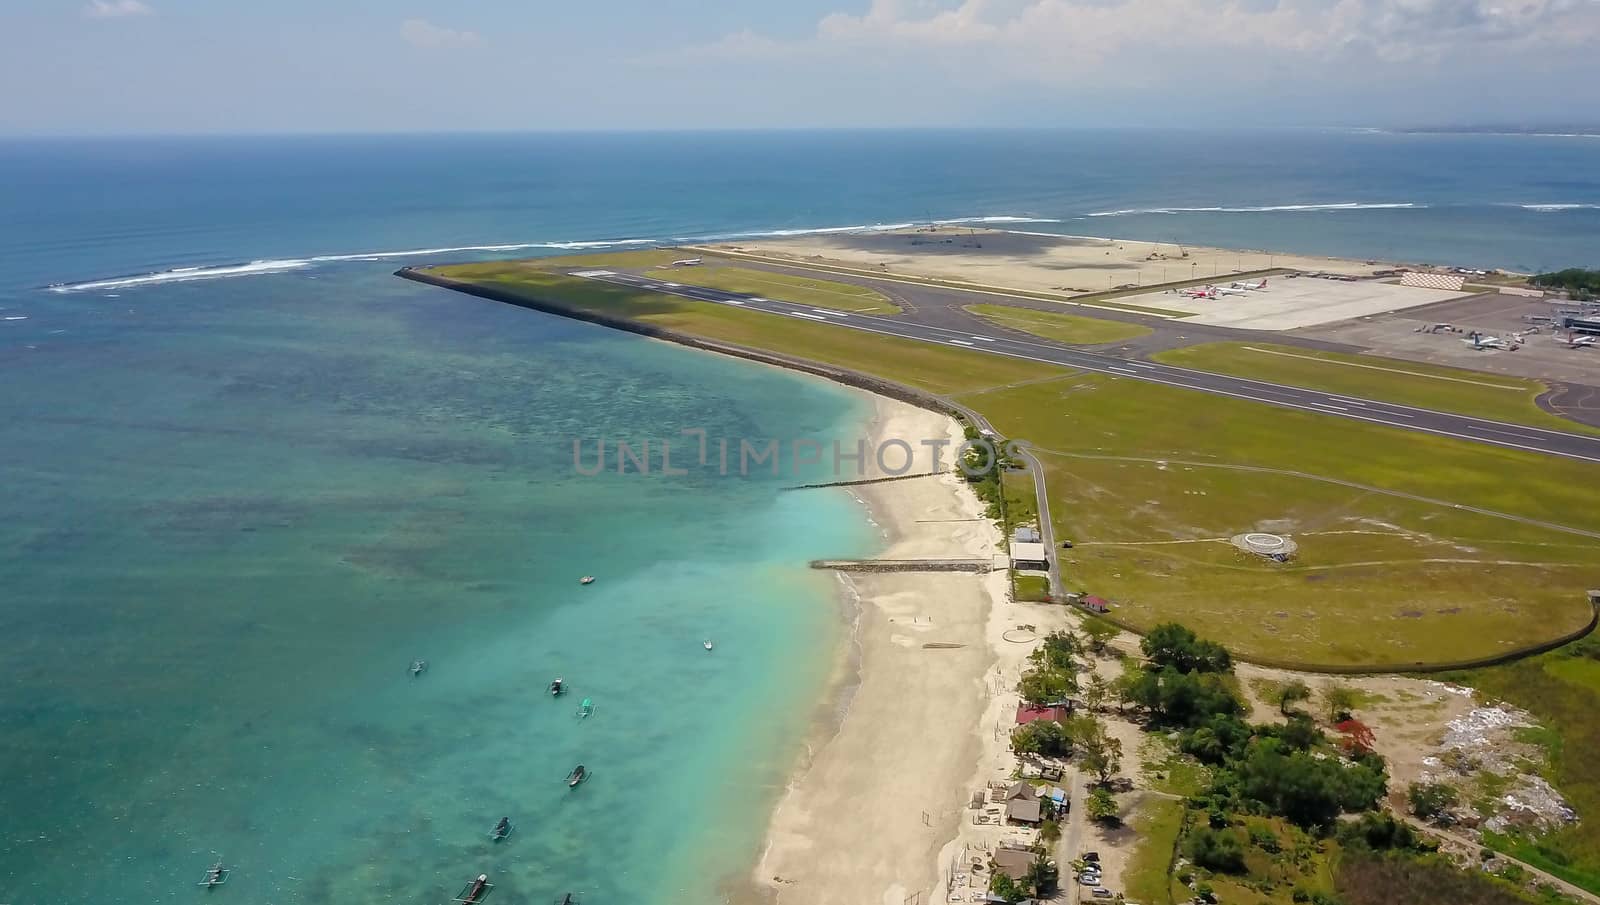 Aerial view of the runway from the top of the tower of the international airport controls Bali with a parked plane and several planes are on the runway. Aerial view to Ngurah Rai airport, Indonesia.